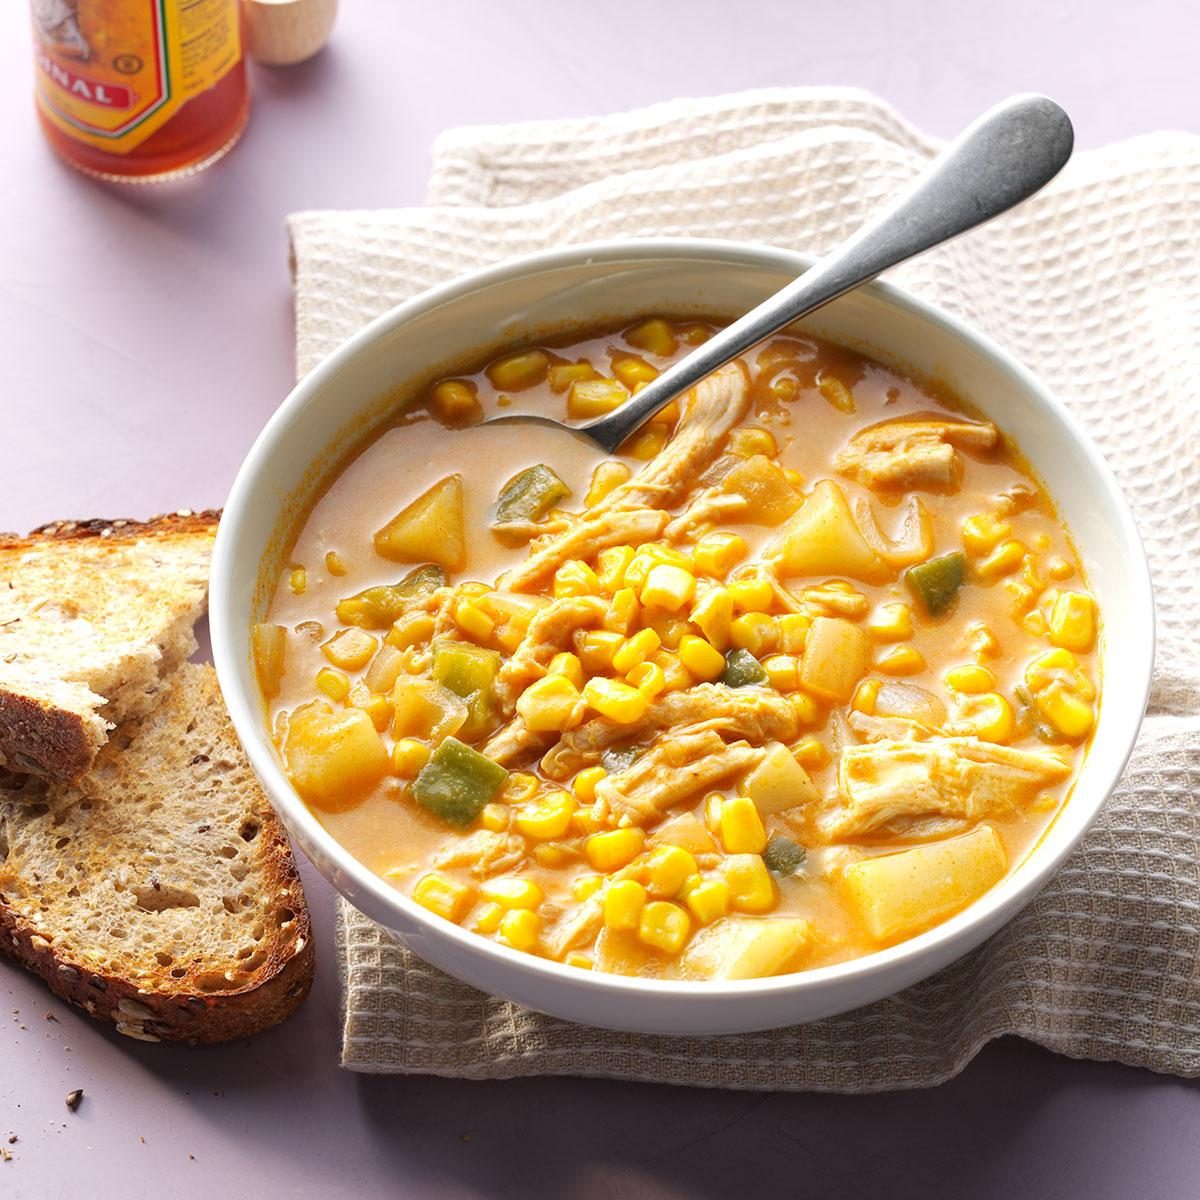 <p>Gently spiced corn chowder is always a good option for kids, but feel free to rev up yours with hot pepper sauce. This chowder’s a lifesaver on busy weeknights. —Andrea Early, Harrisonburg, Virginia </p> <div class="listicle-page__buttons"> <div class="listicle-page__cta-button"><a href='https://www.tasteofhome.com/recipes/zippy-chicken-and-corn-chowder/'>Go to Recipe</a></div> </div>